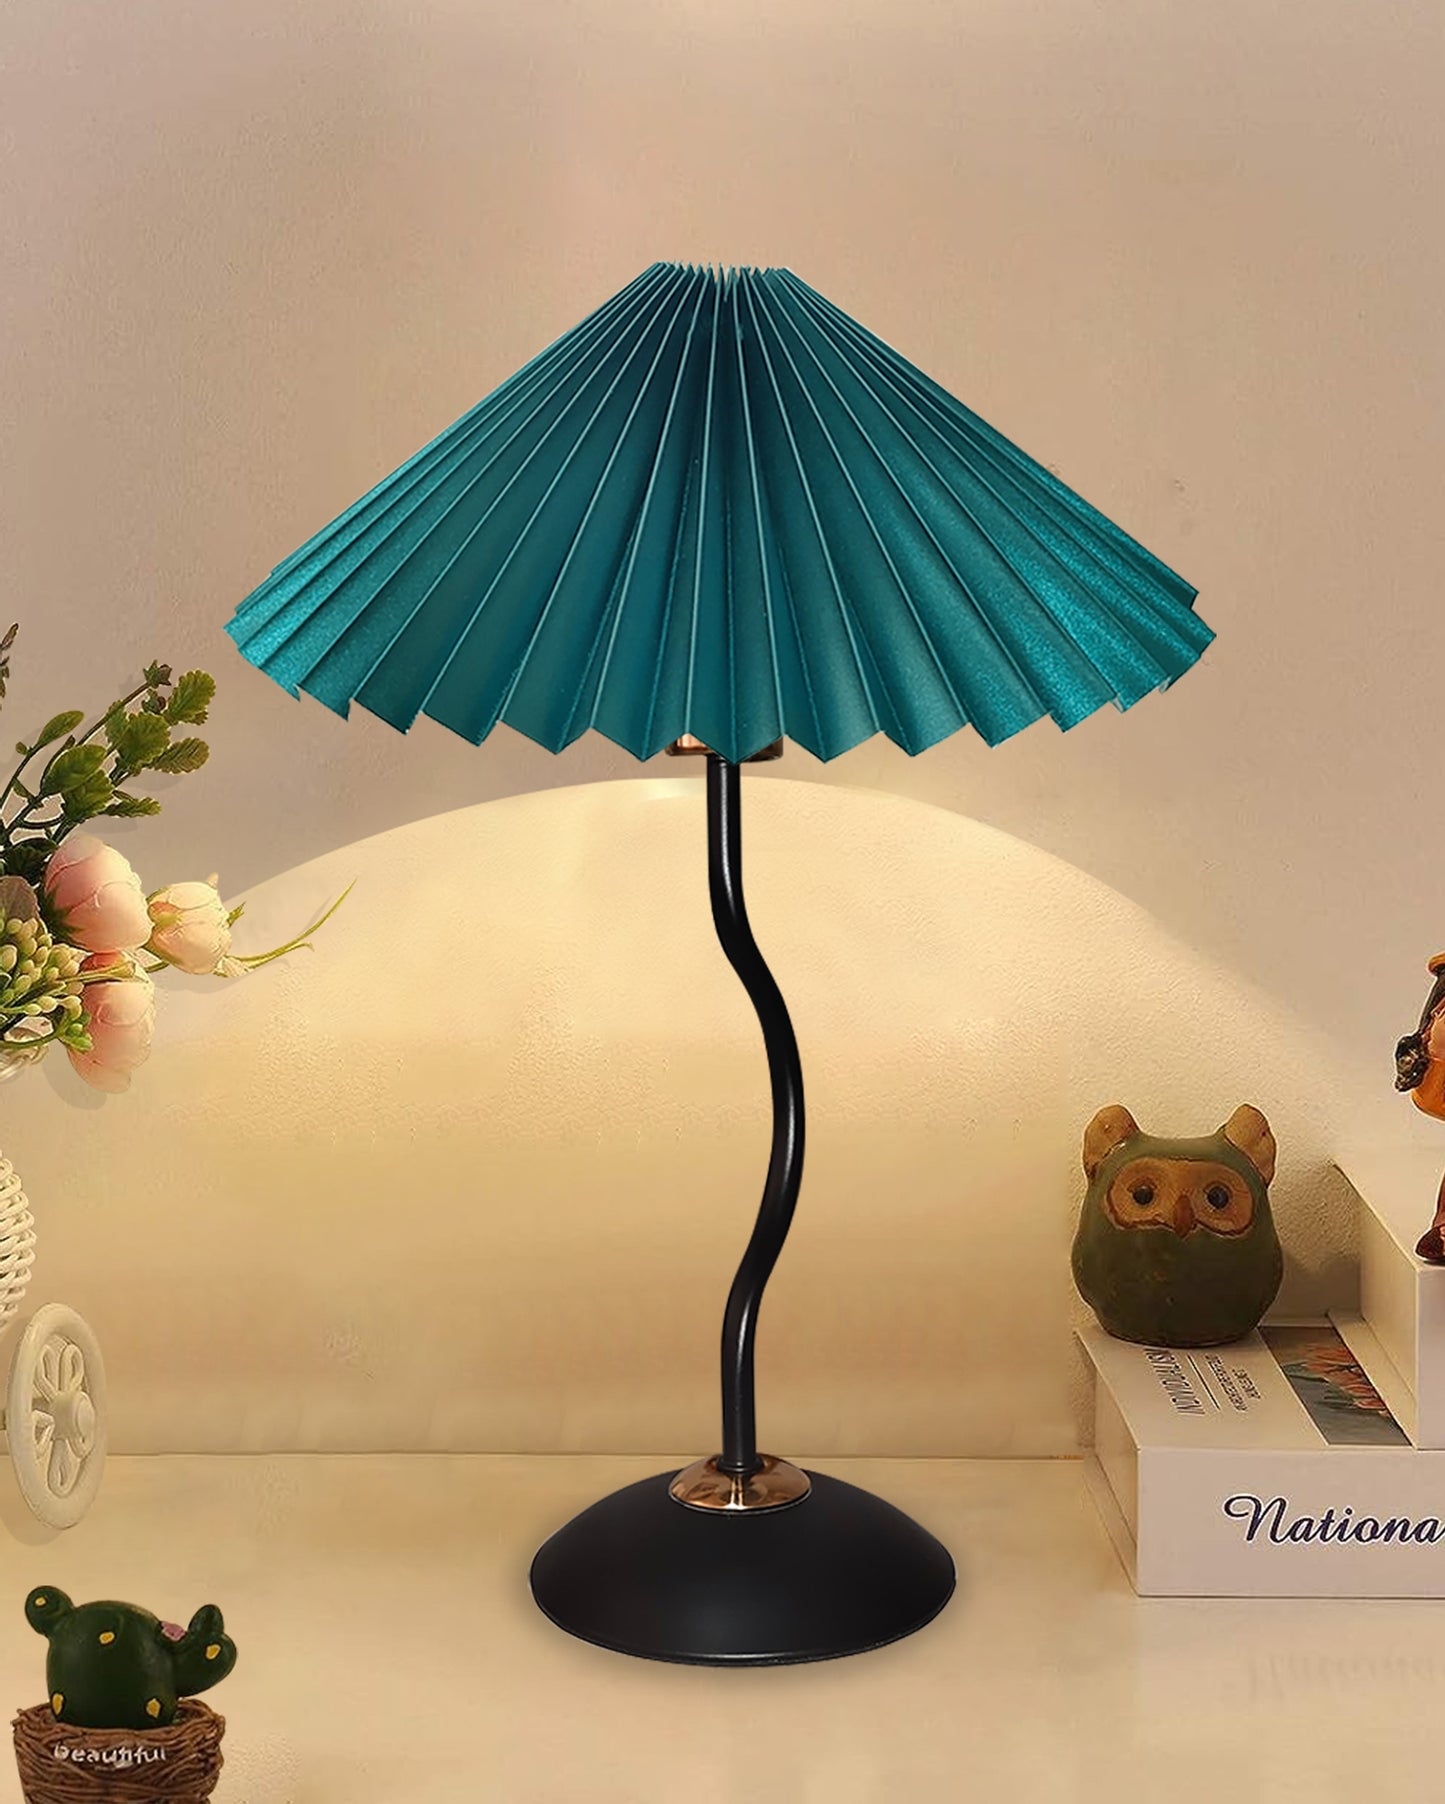 Matt Black Twister Small Pleated Lamp, Modern Bedside Nightstand/Table Lamp with Green Lampshade, Metal Base for Bedroom, Home Office, Living Room, Kids Dorm, E14 Holder